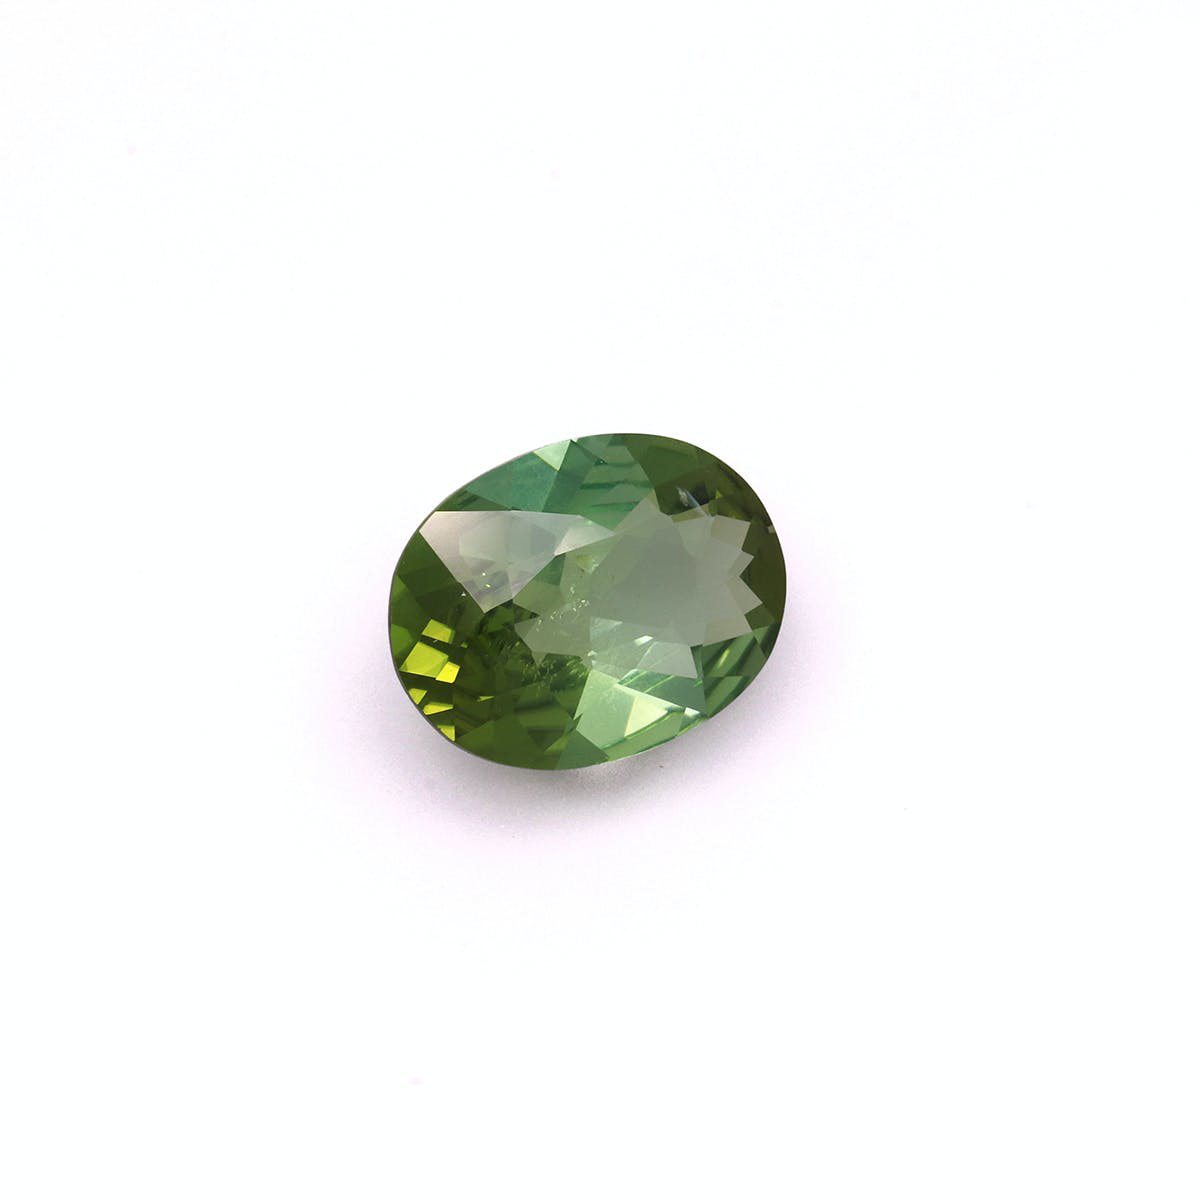 Picture of Pistachio Green Tourmaline 4.55ct (TG0699)